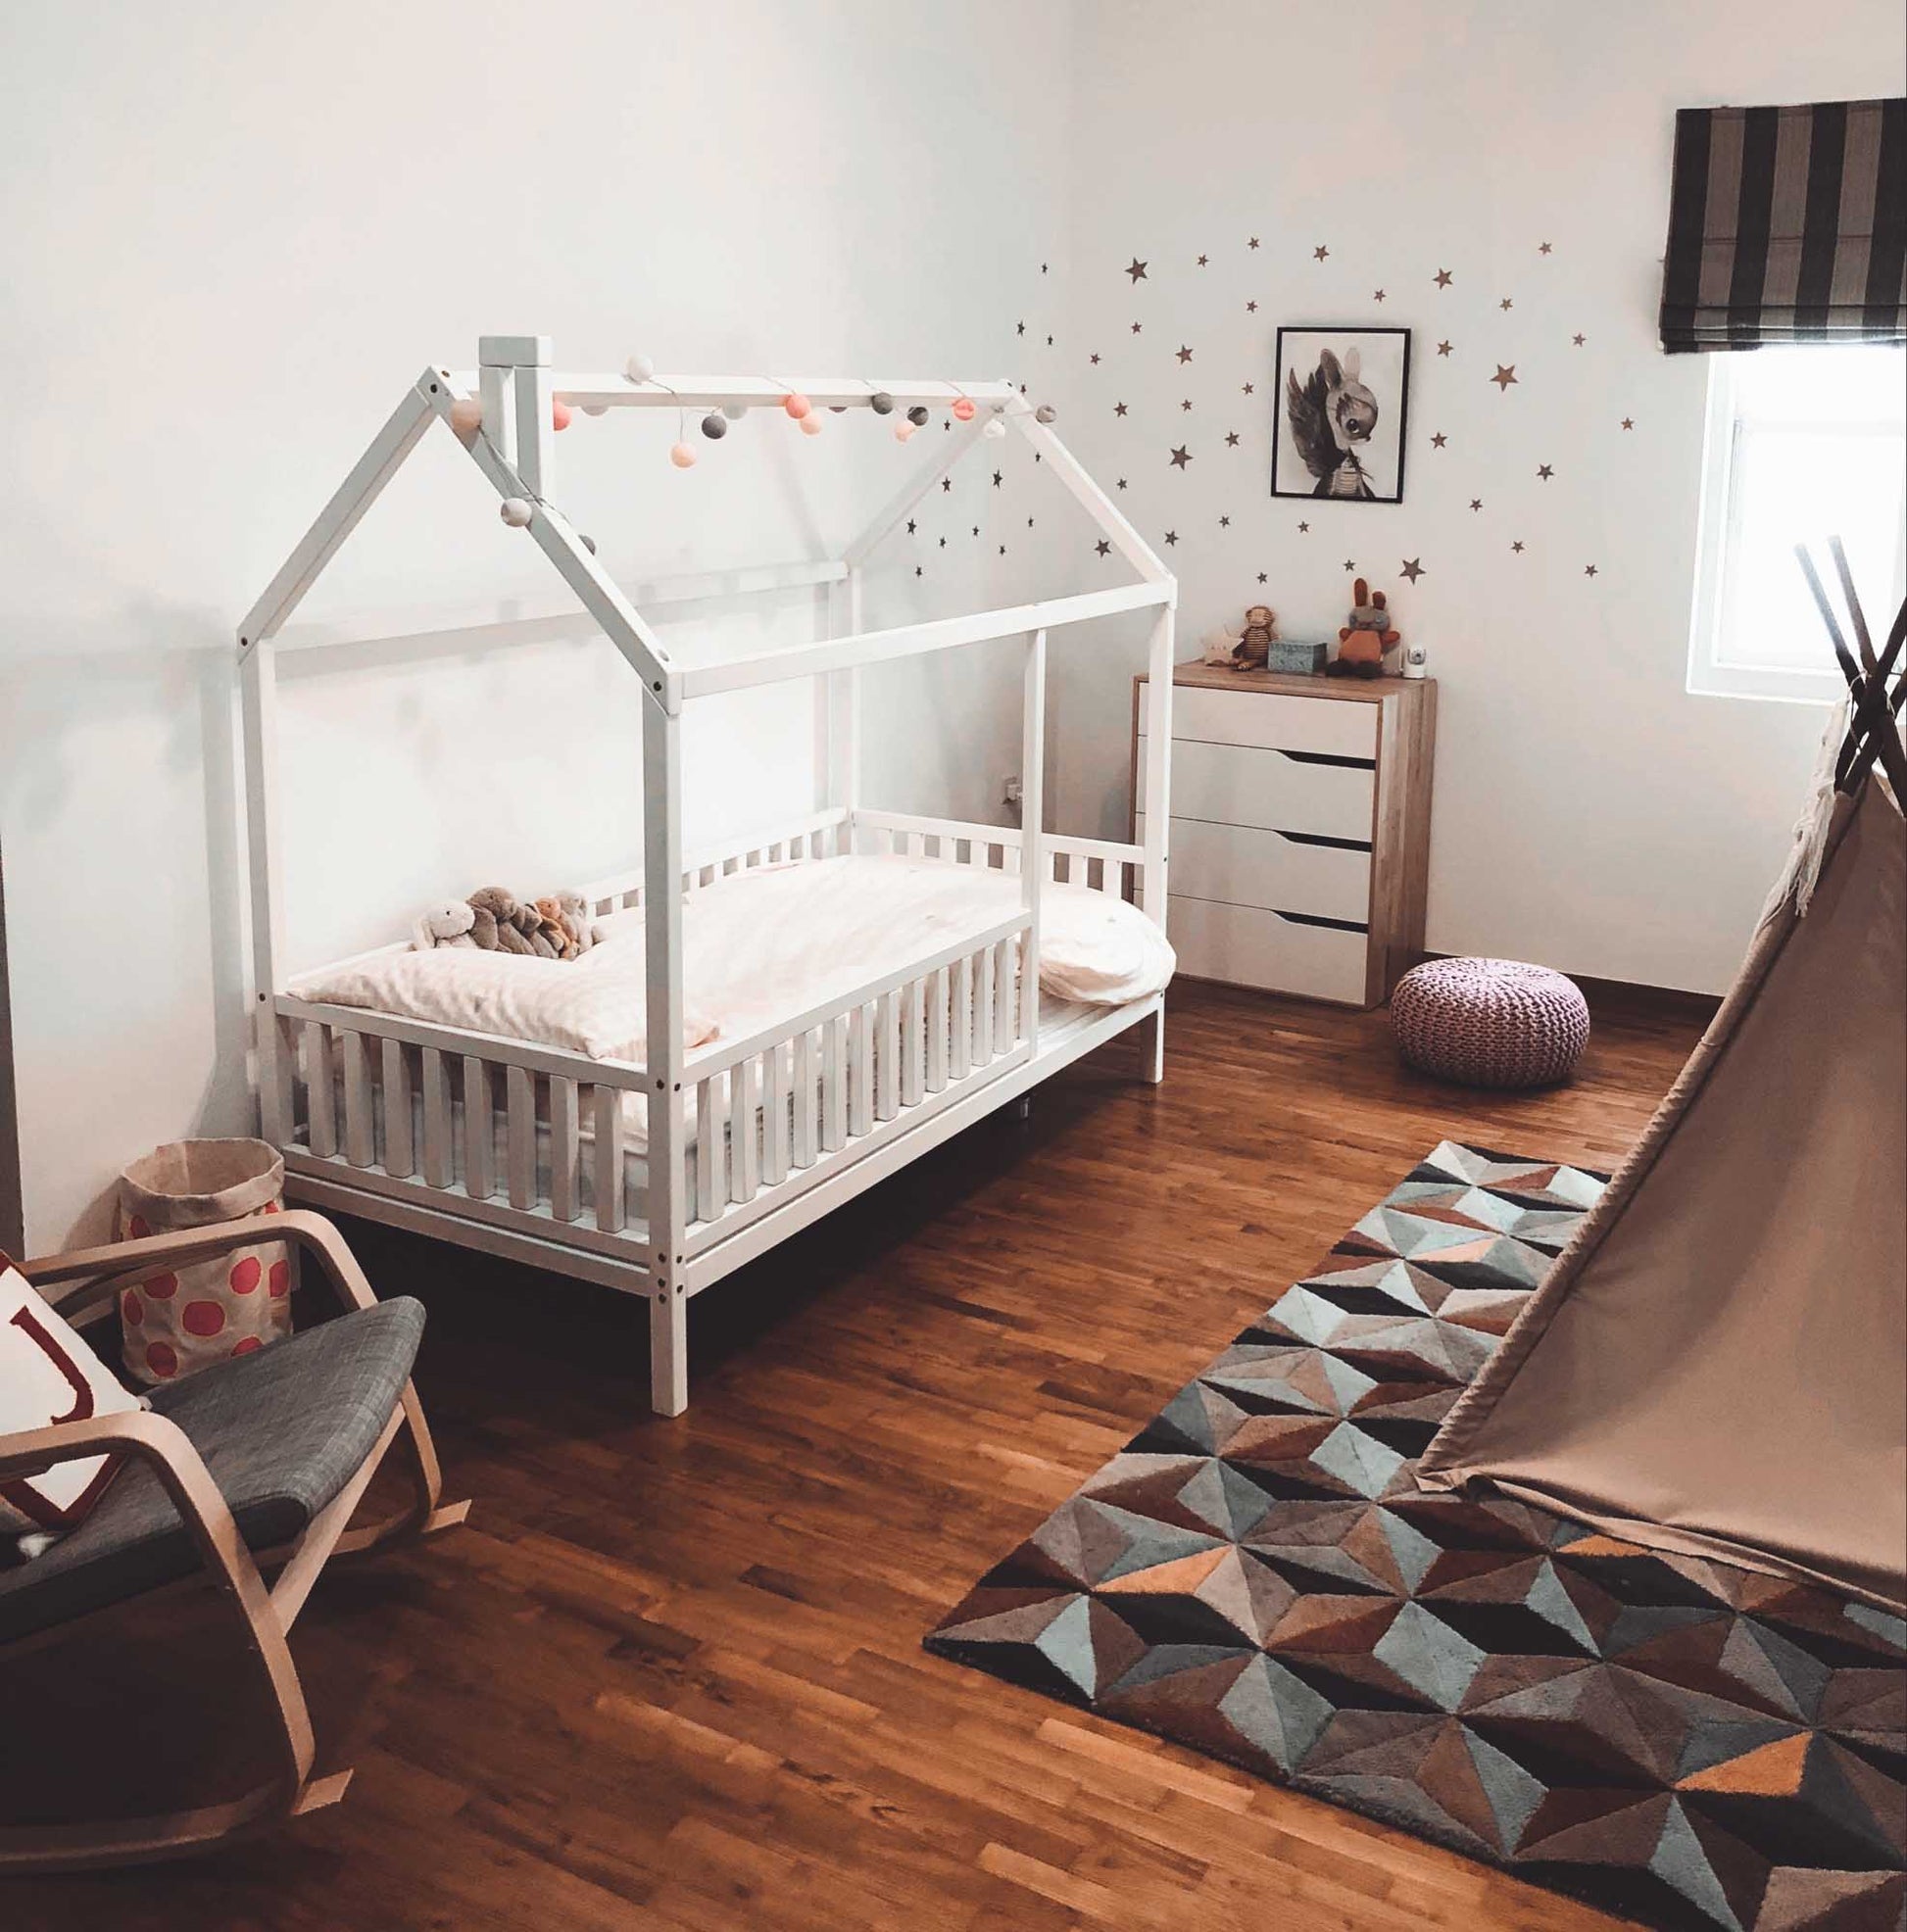 A toddler's room with a kids' house bed on legs with a fence, teepee, and chair.